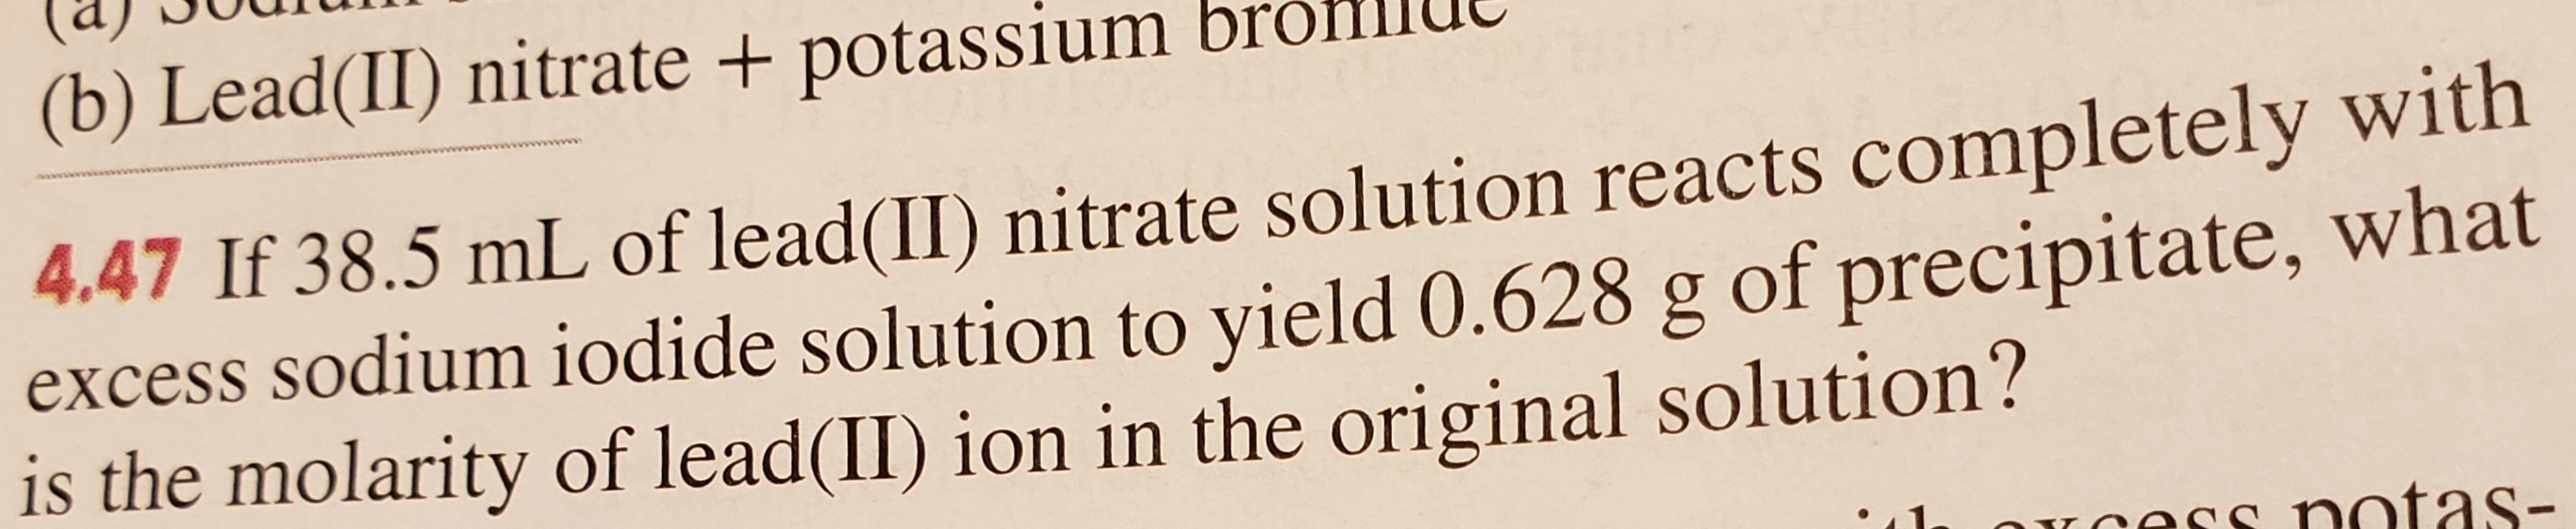 (b) Lead(II) nitrate +potassium brom
4.47 If 38.5 mL of lead(II) nitrate solution reacts completely with
excess sodium iodide solution to yield 0.628 g of precipitate, what
is the molarity of lead(II) ion in the original solution?
ss notas-
